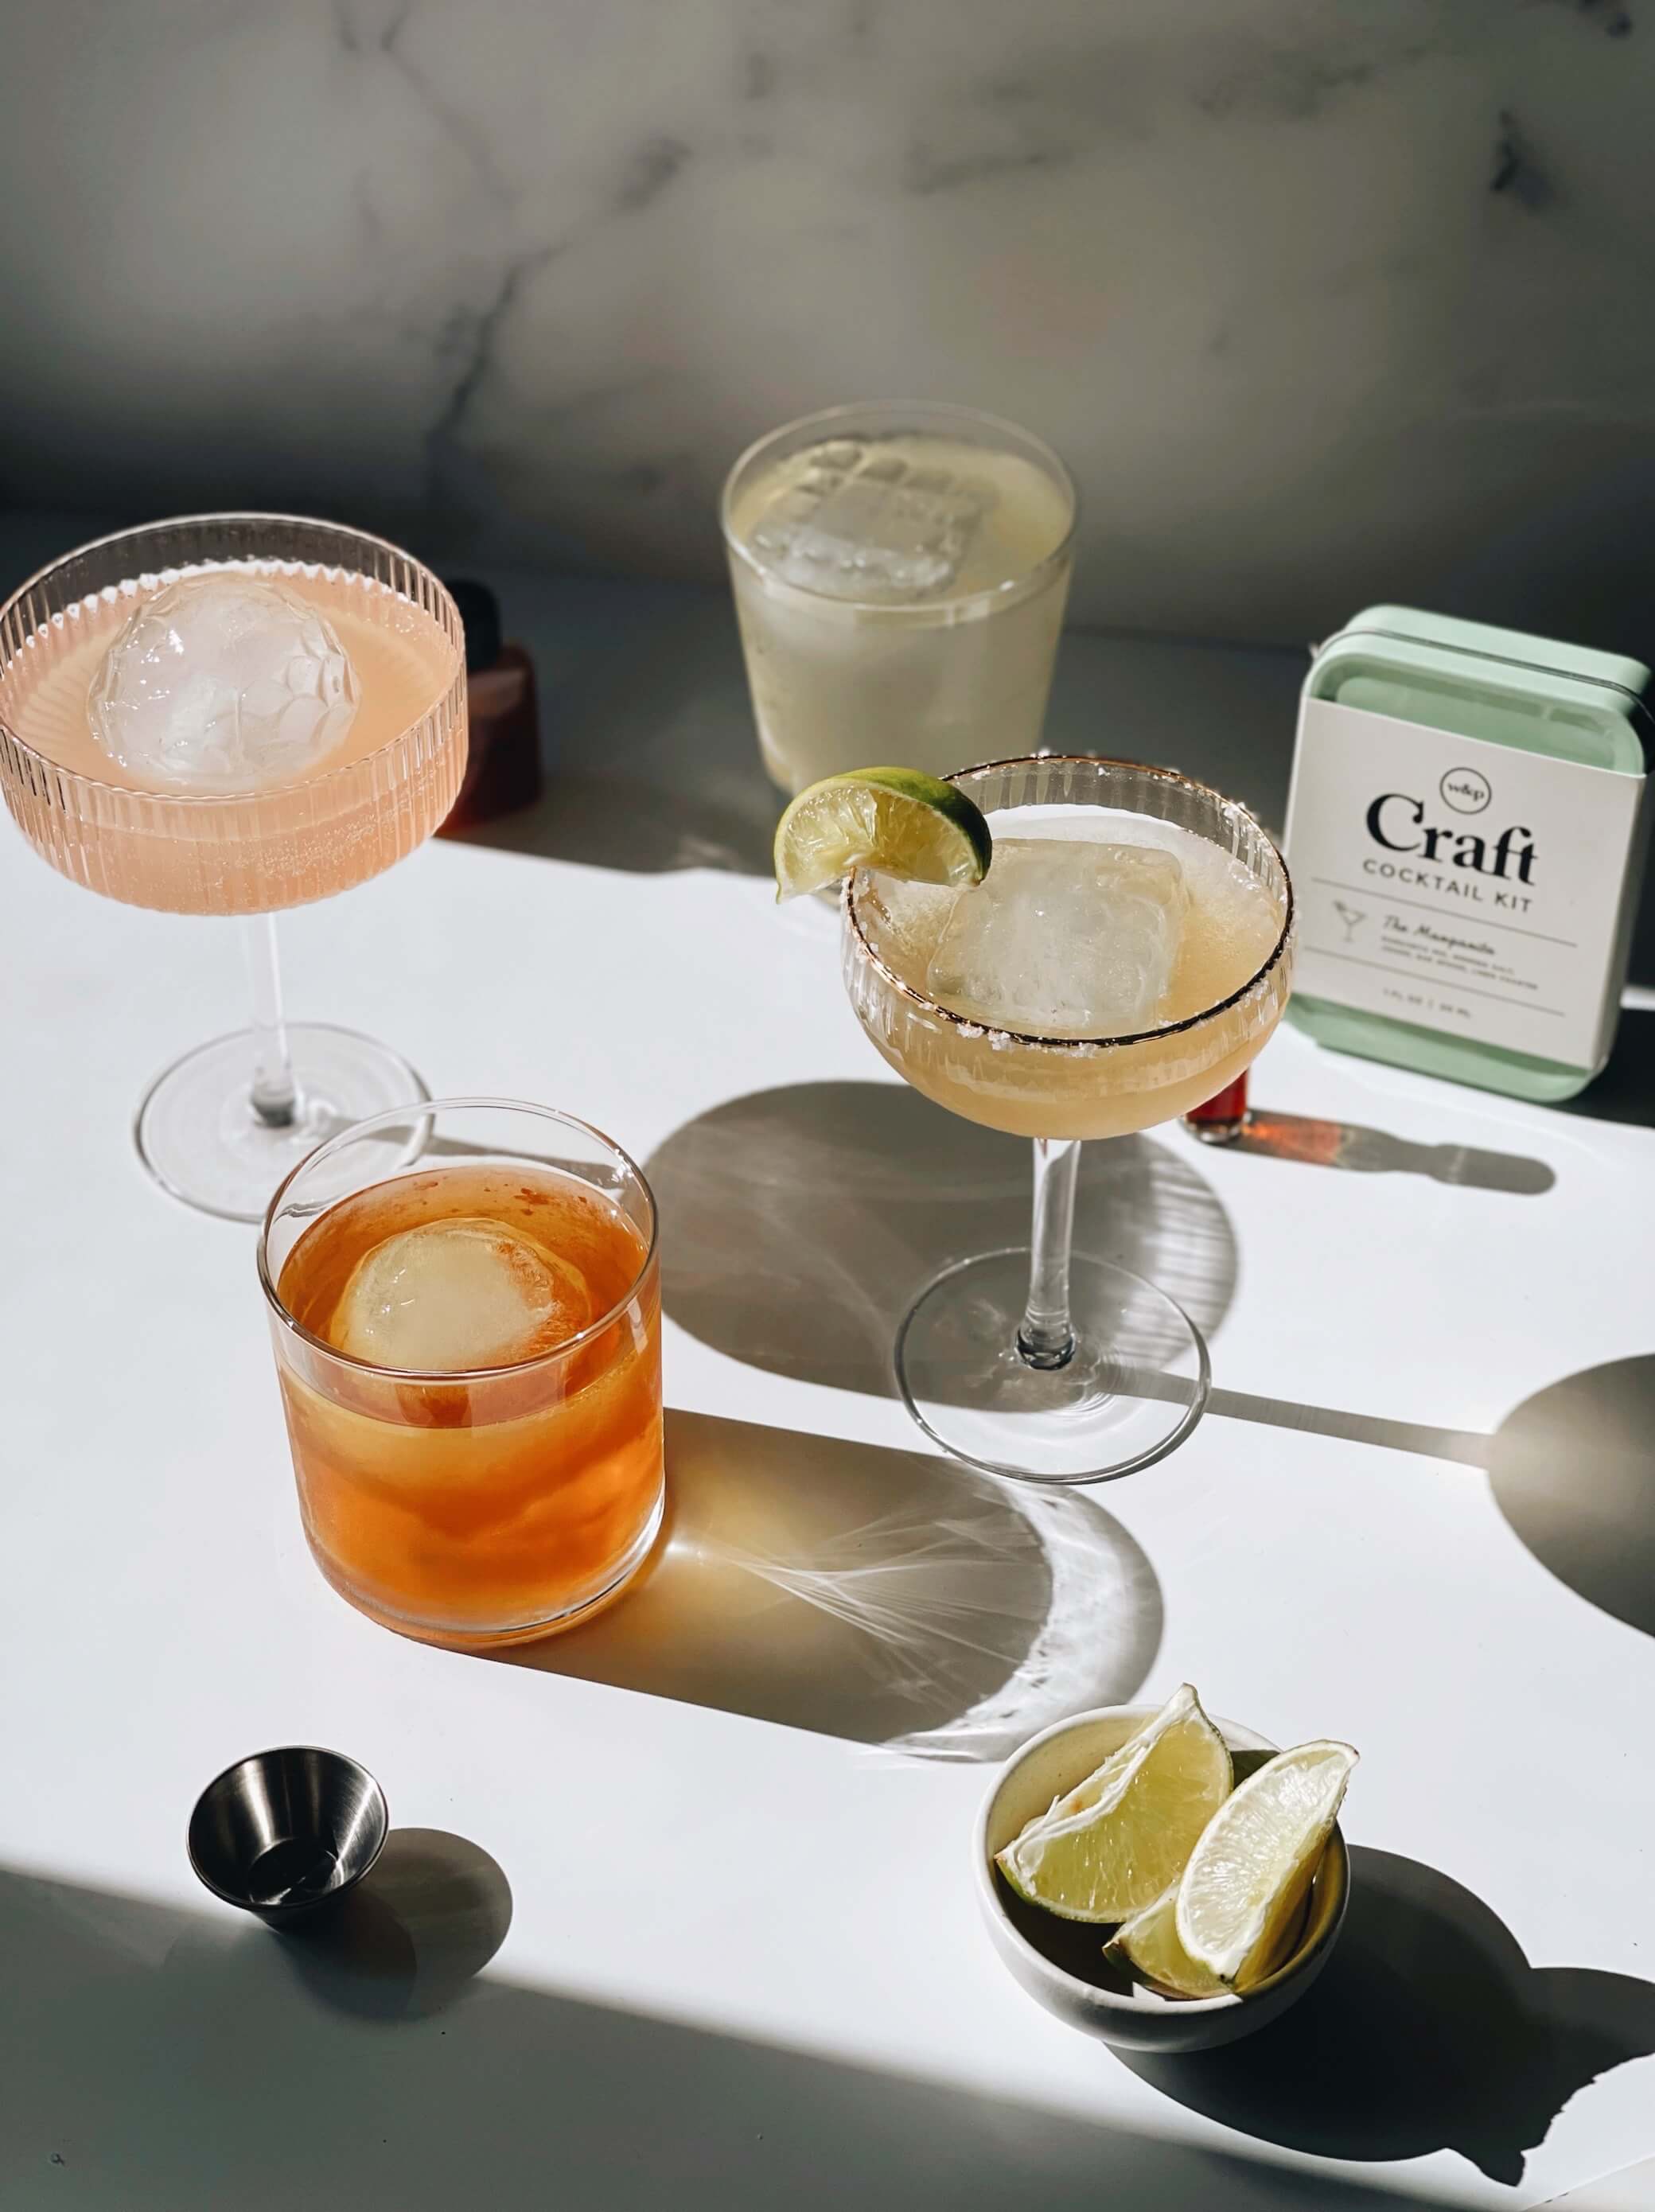 These Personalized Ice Cube Trays Are the Perfect Gift for Cocktail Lovers